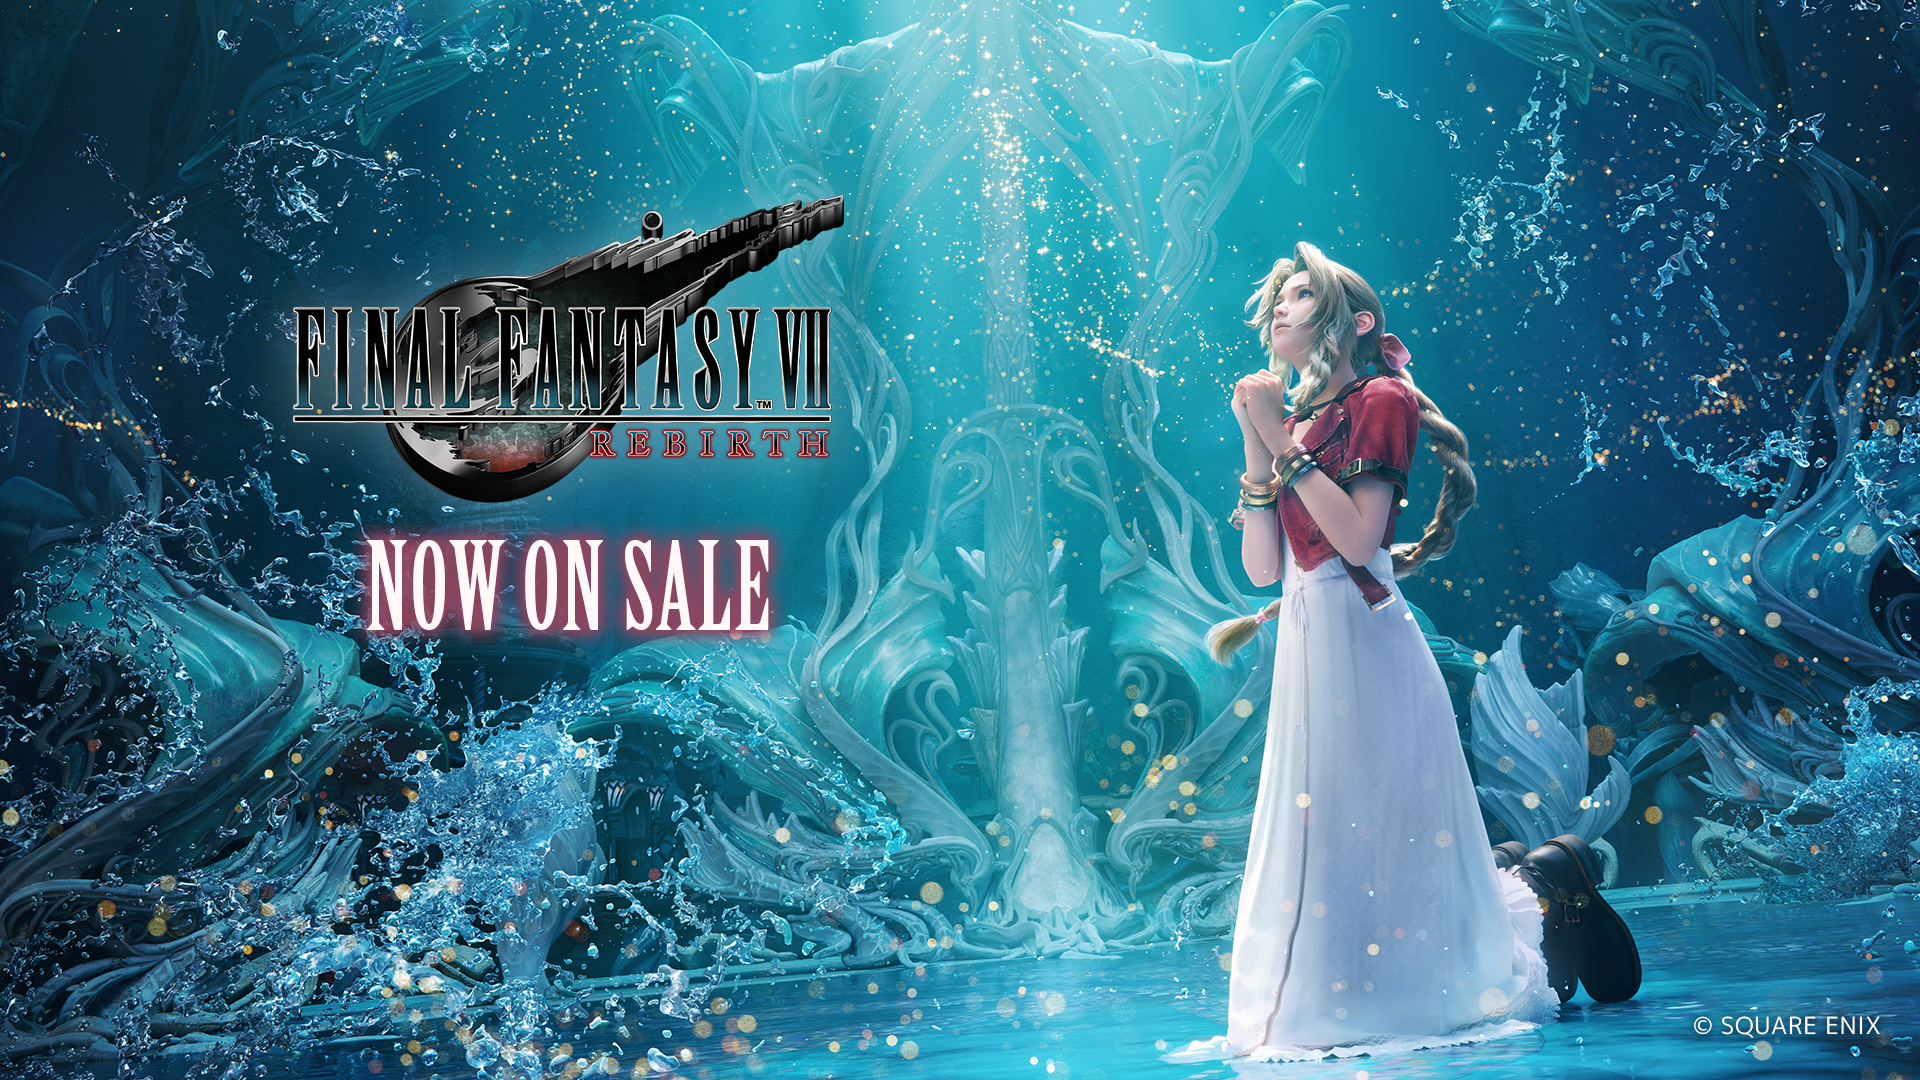 FINAL FANTASY VII REBIRTH AVAILABLE NOW ON PLAYSTATION®5